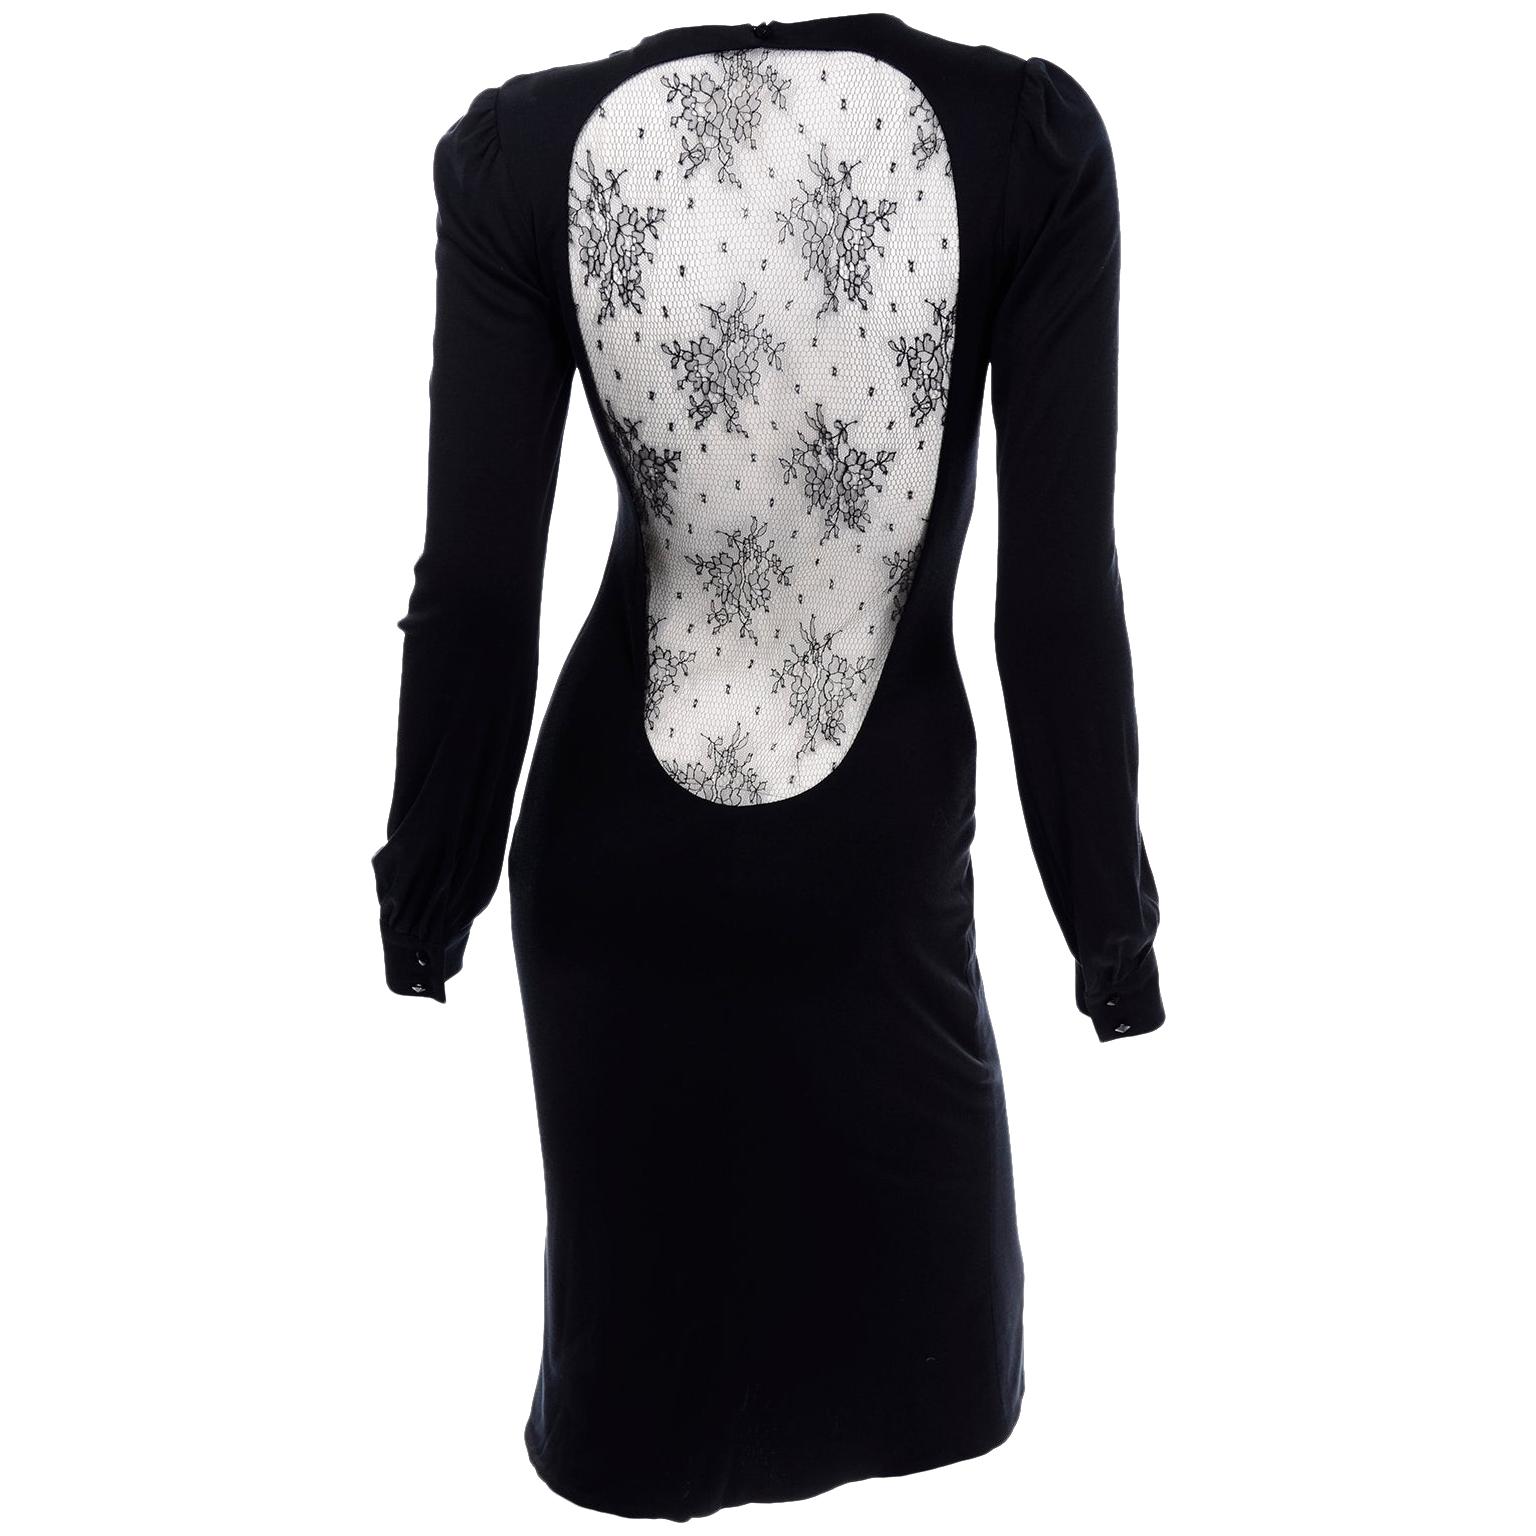 Alexander McQueen Black Dress With Low Lace Back 2005 The Man Who Knew Too Much For Sale